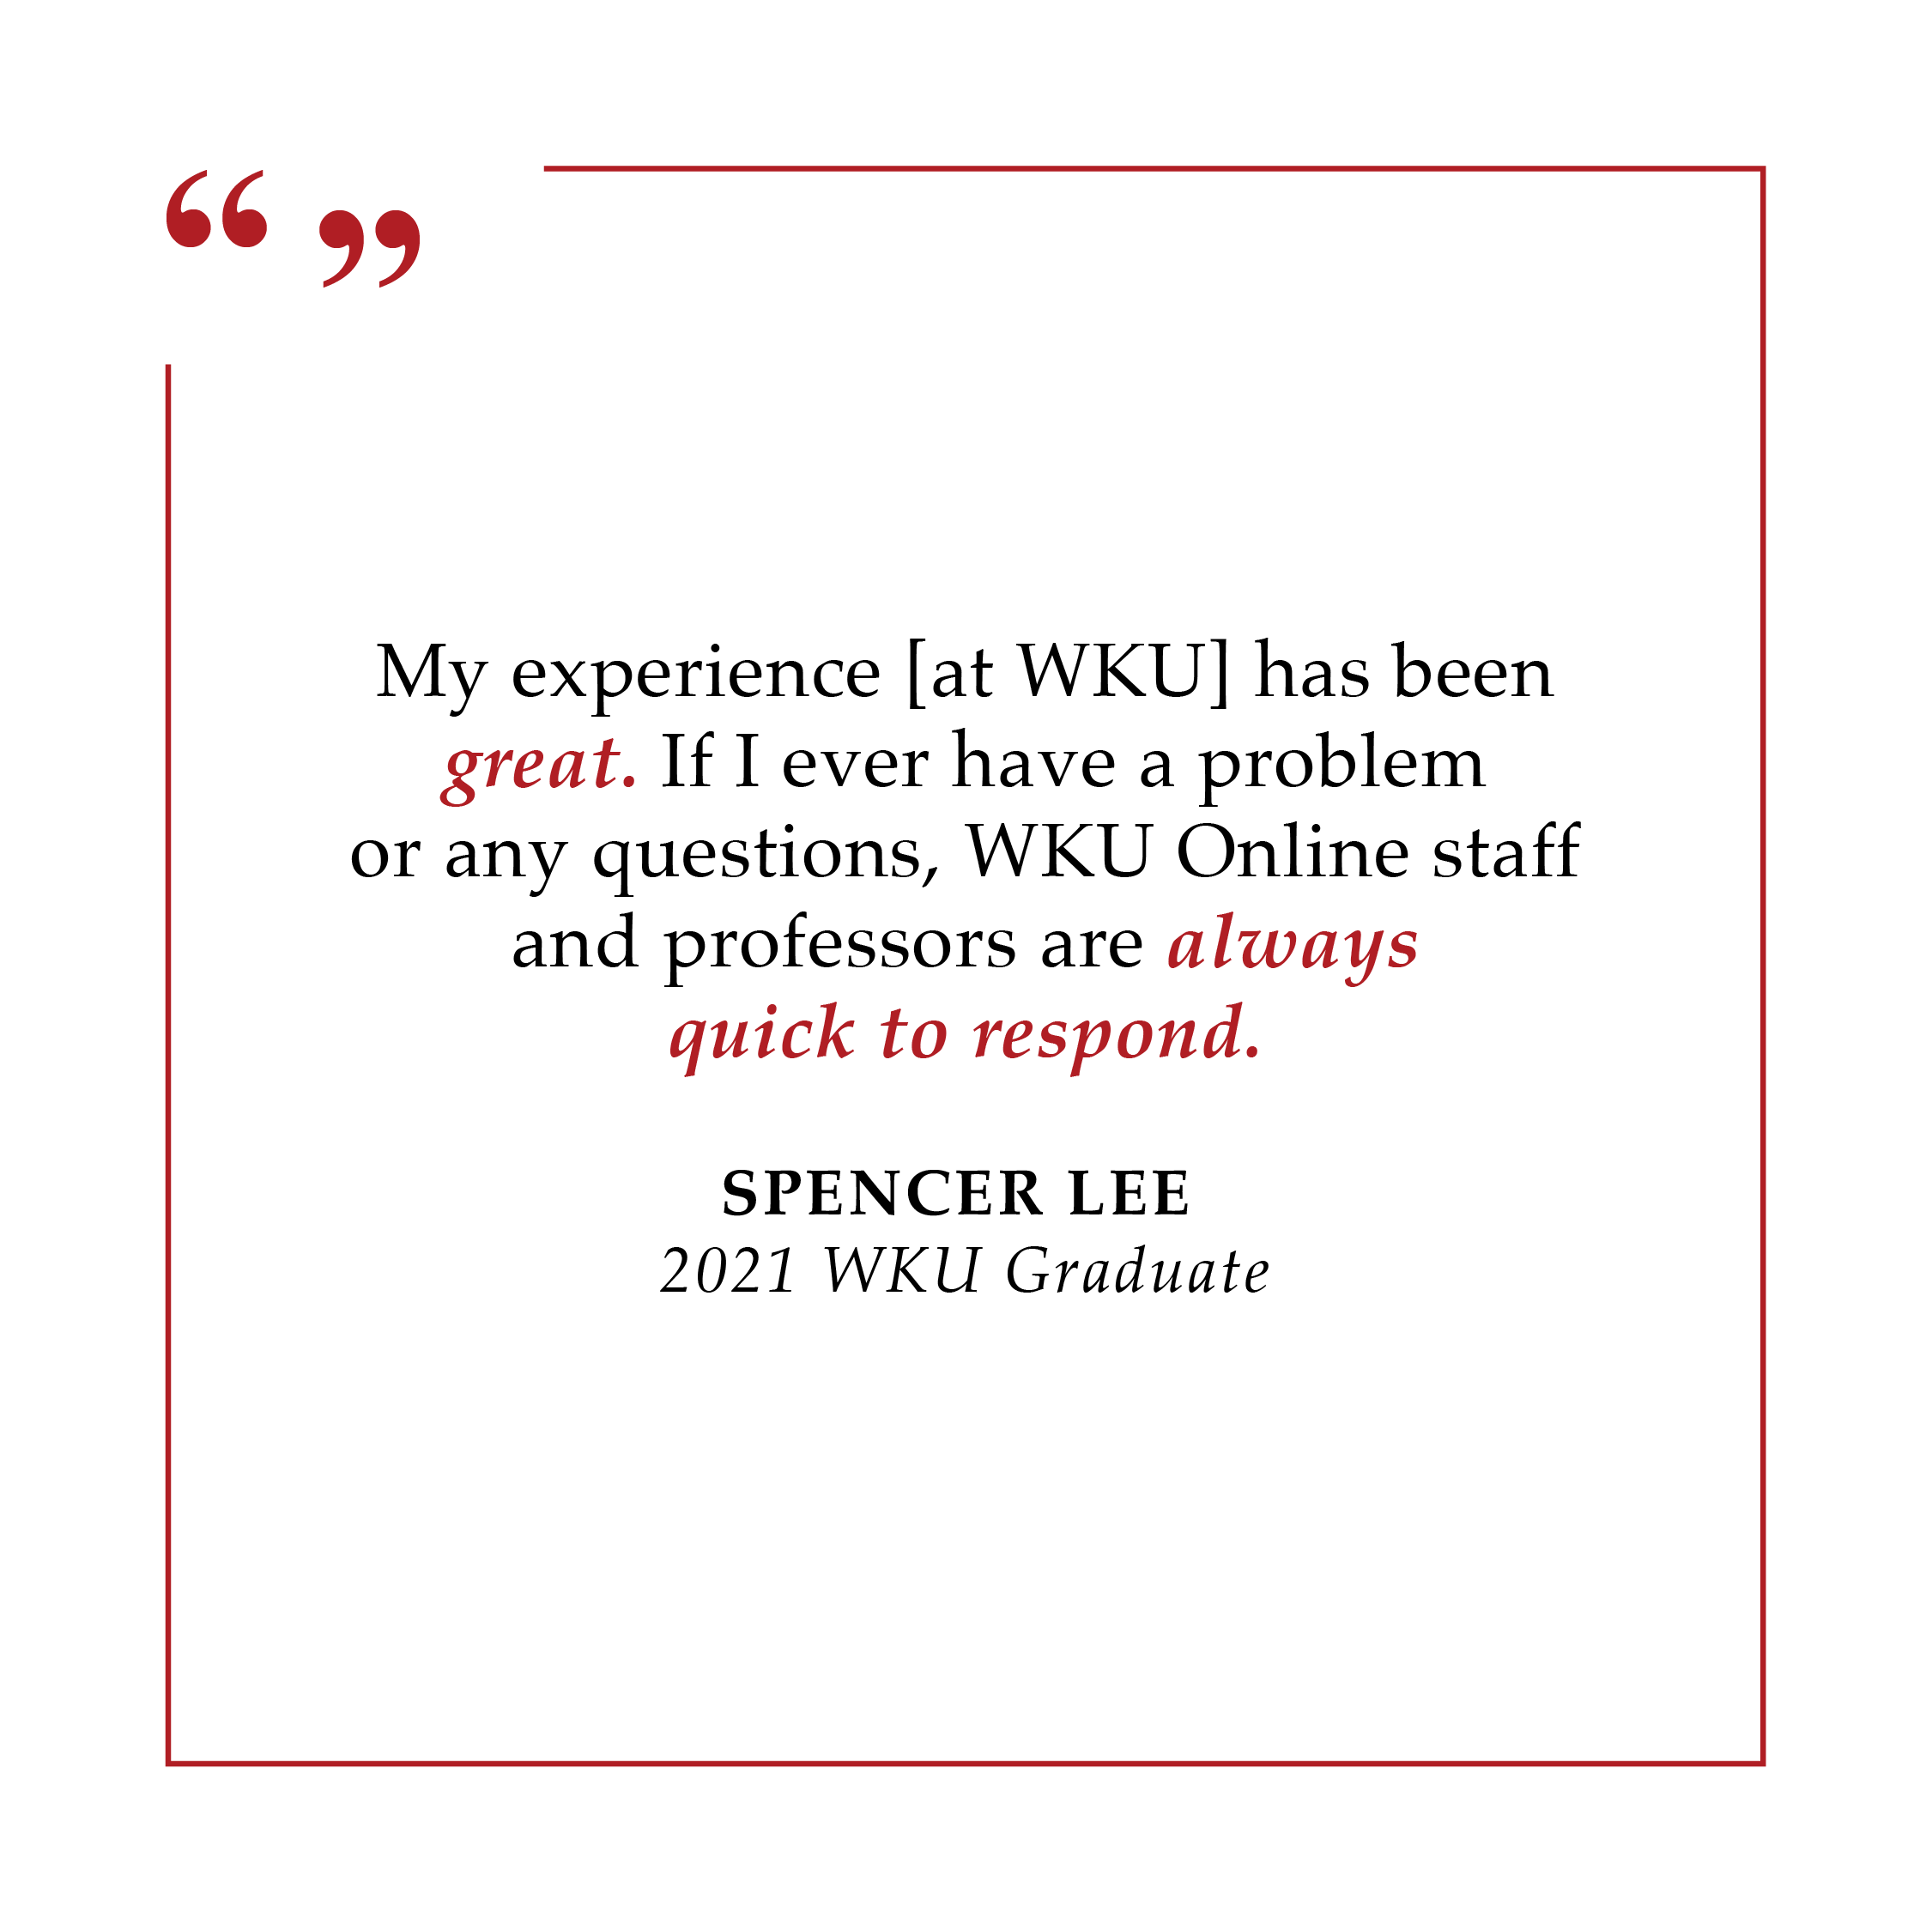 "My experience [at WKU] has been great. If I ever have a problem or any questions, WKU Online staff and professors are always quick to respond." - Spencer Lee, 2021 WKU Graduate